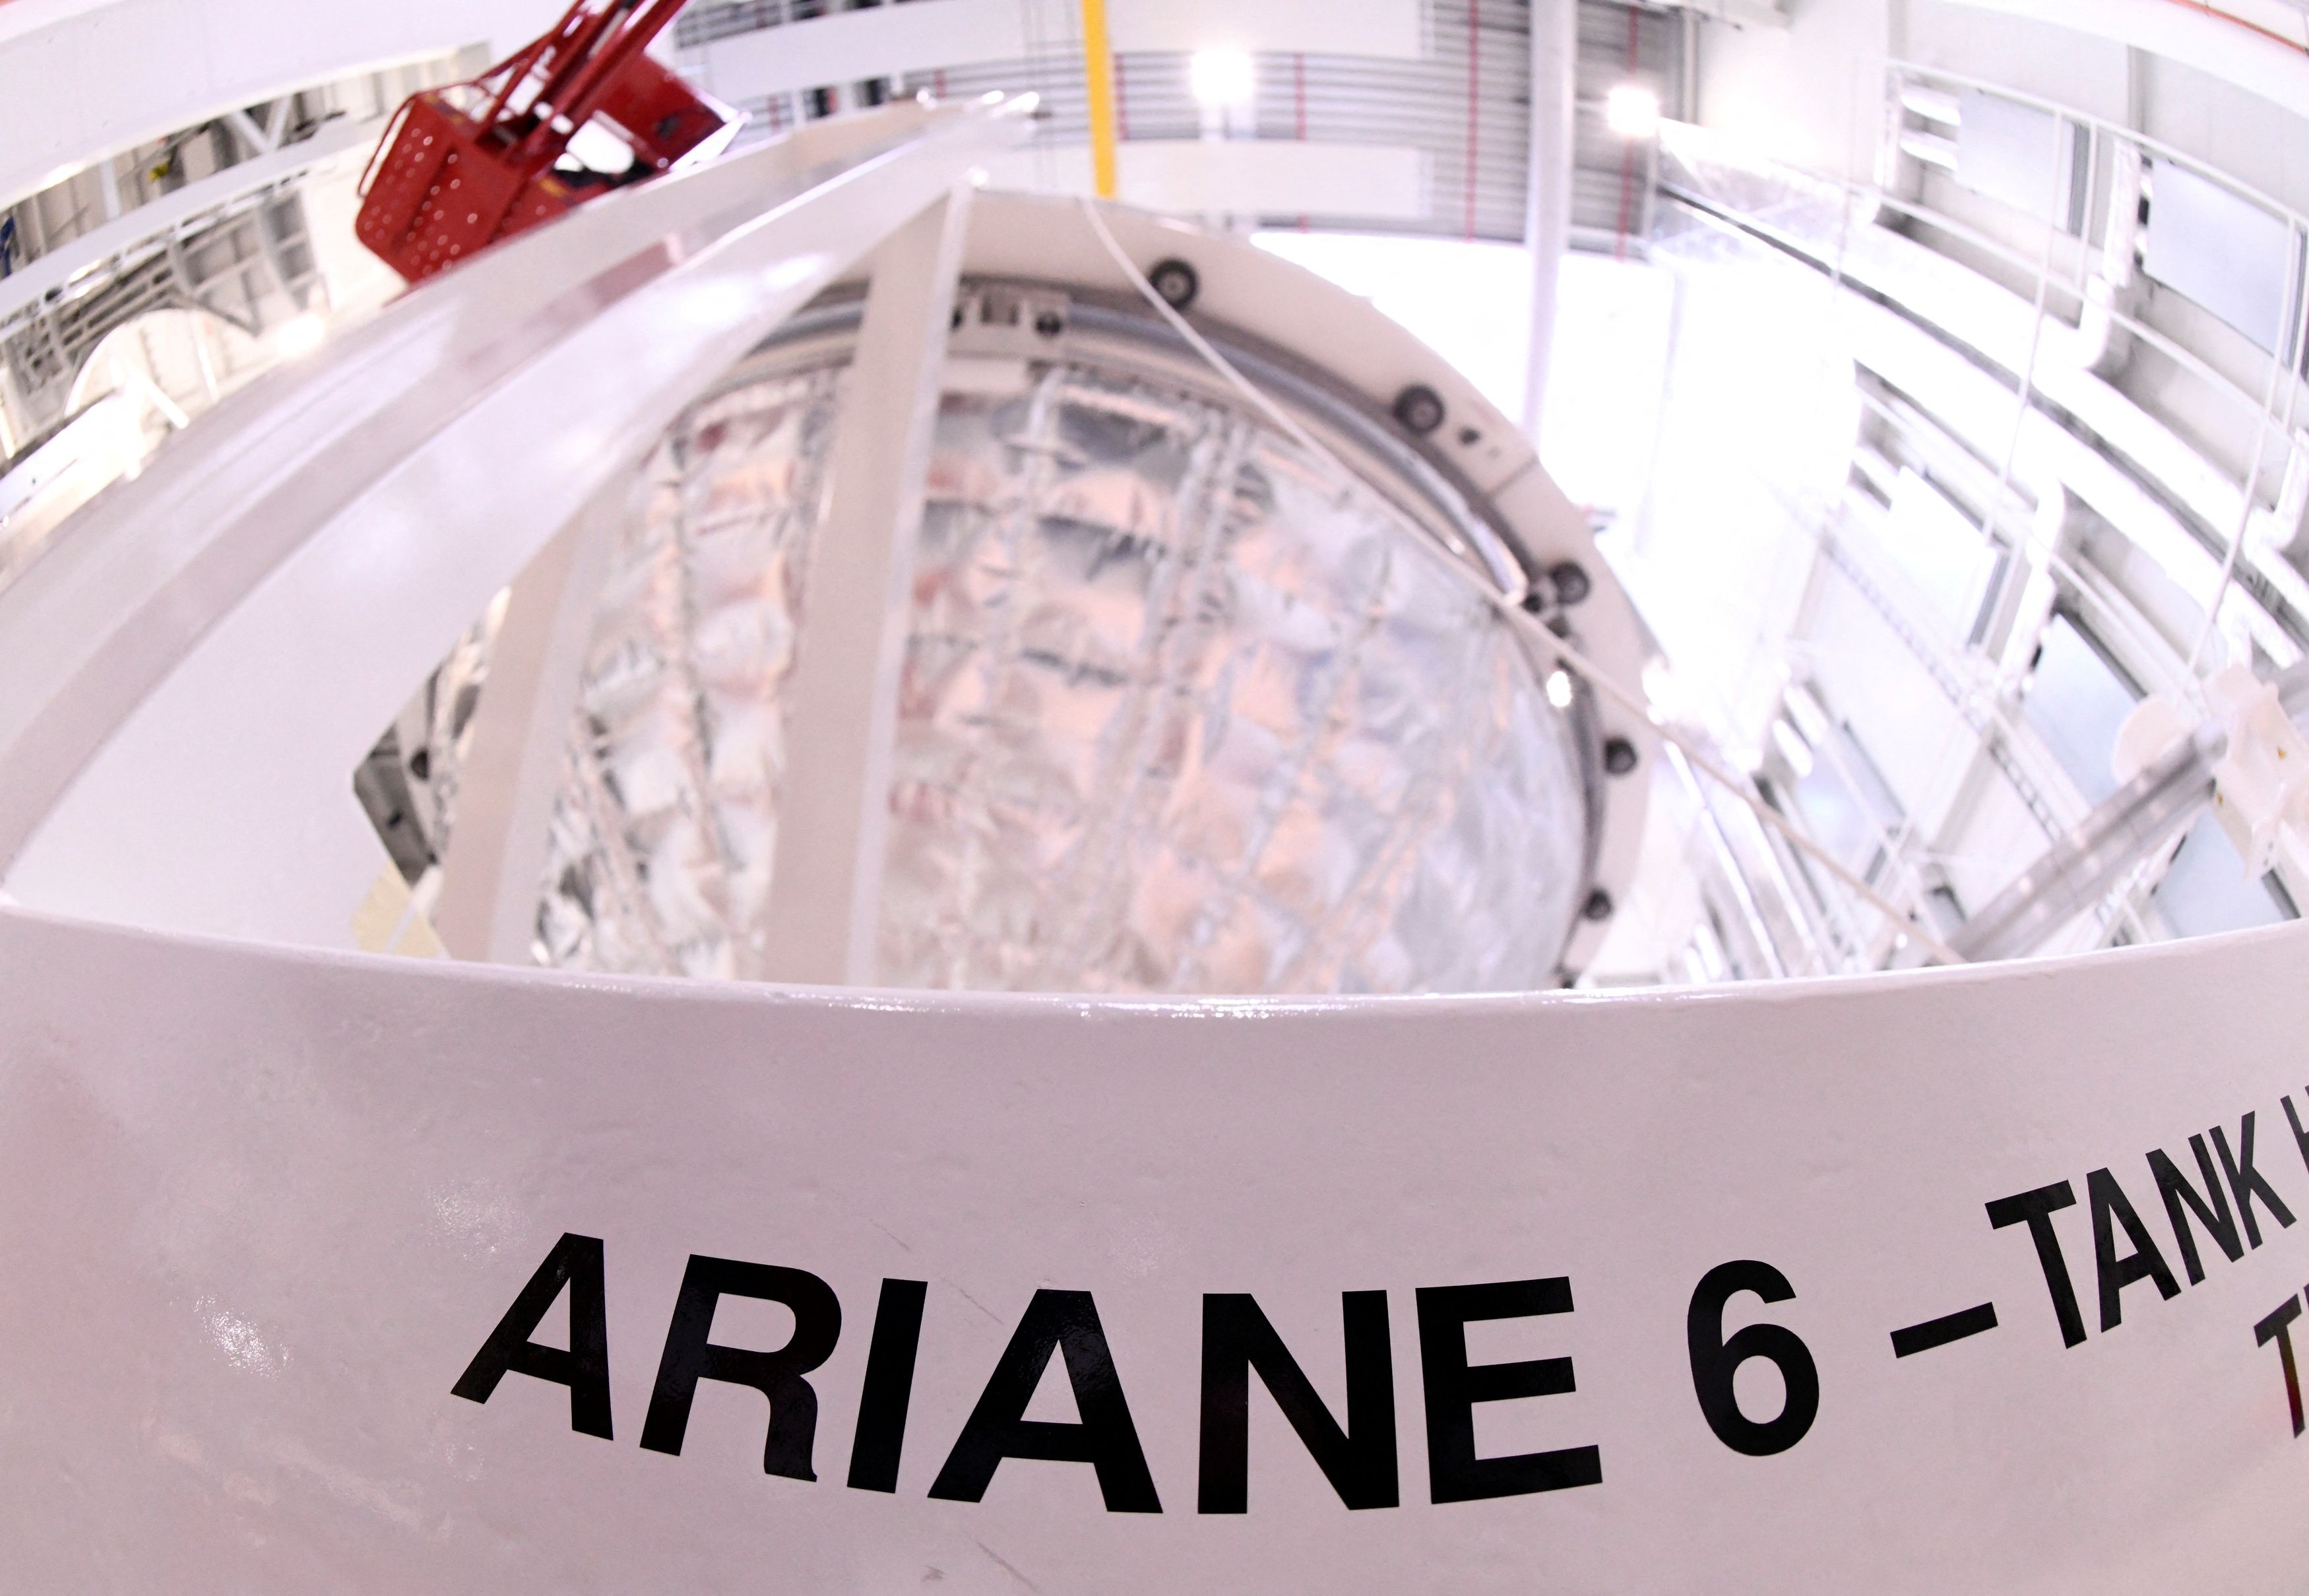 A tank of Ariane 6, Europe's next-generation space rocket, is pictured in a production line of Ariane Group in Bremen